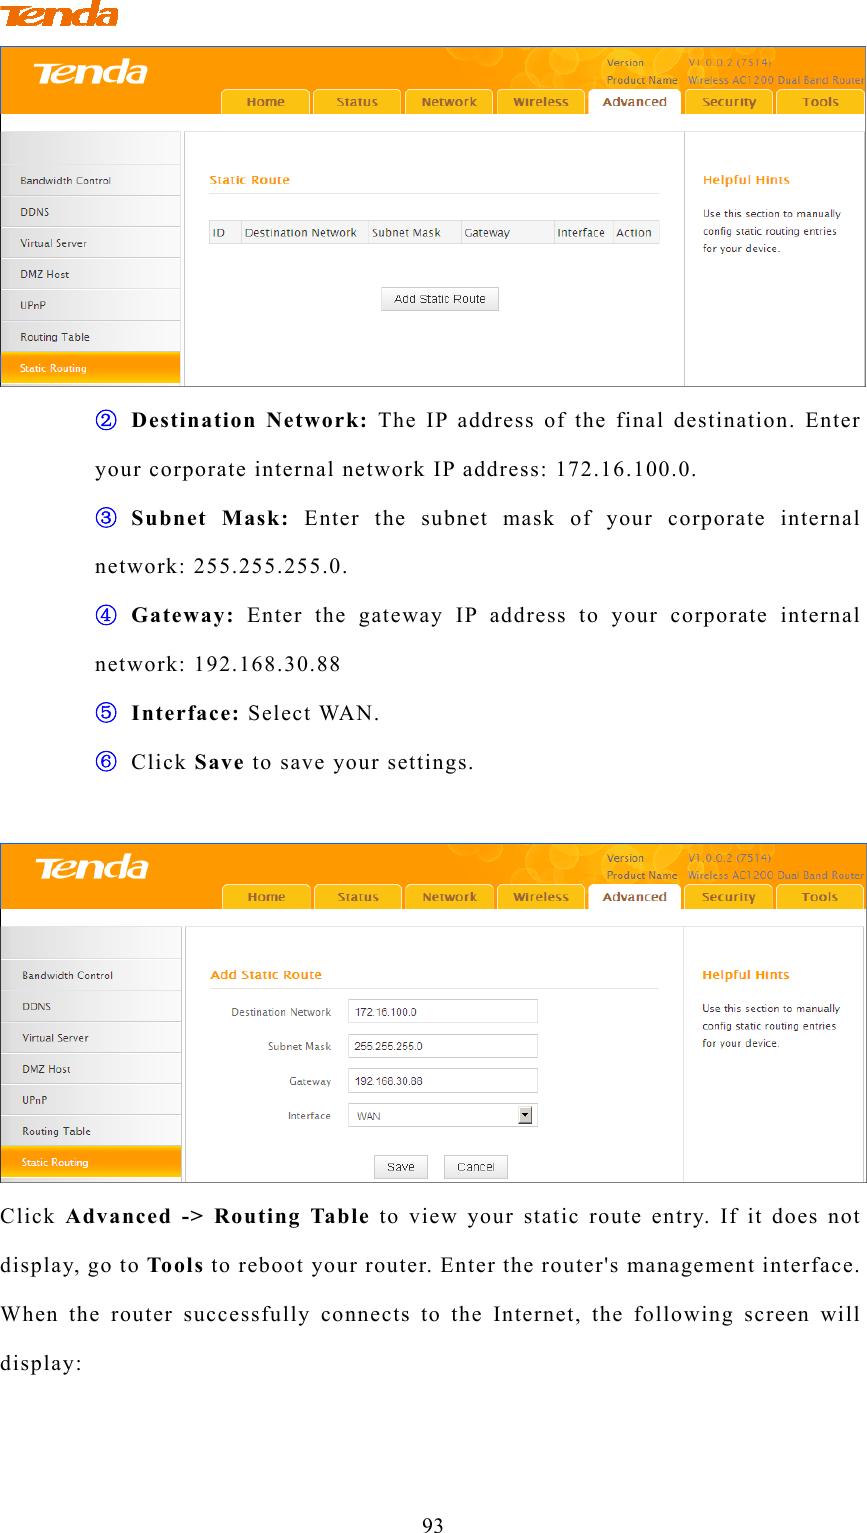                                         93  ② Destination Network: The IP address of the final destination. Enter your corporate internal network IP address: 172.16.100.0. ③ Subnet Mask: Enter the subnet mask of your corporate internal network: 255.255.255.0. ④ Gateway: Enter the gateway IP address to your corporate internal network: 192.168.30.88 ⑤ Interface: Select WAN. ⑥ Click Save to save your settings.   Click Advanced -&gt; Routing Table to view your static route entry. If it does not display, go to To ols to reboot your router. Enter the router&apos;s management interface. When the router successfully connects to the Internet, the following screen will display: 